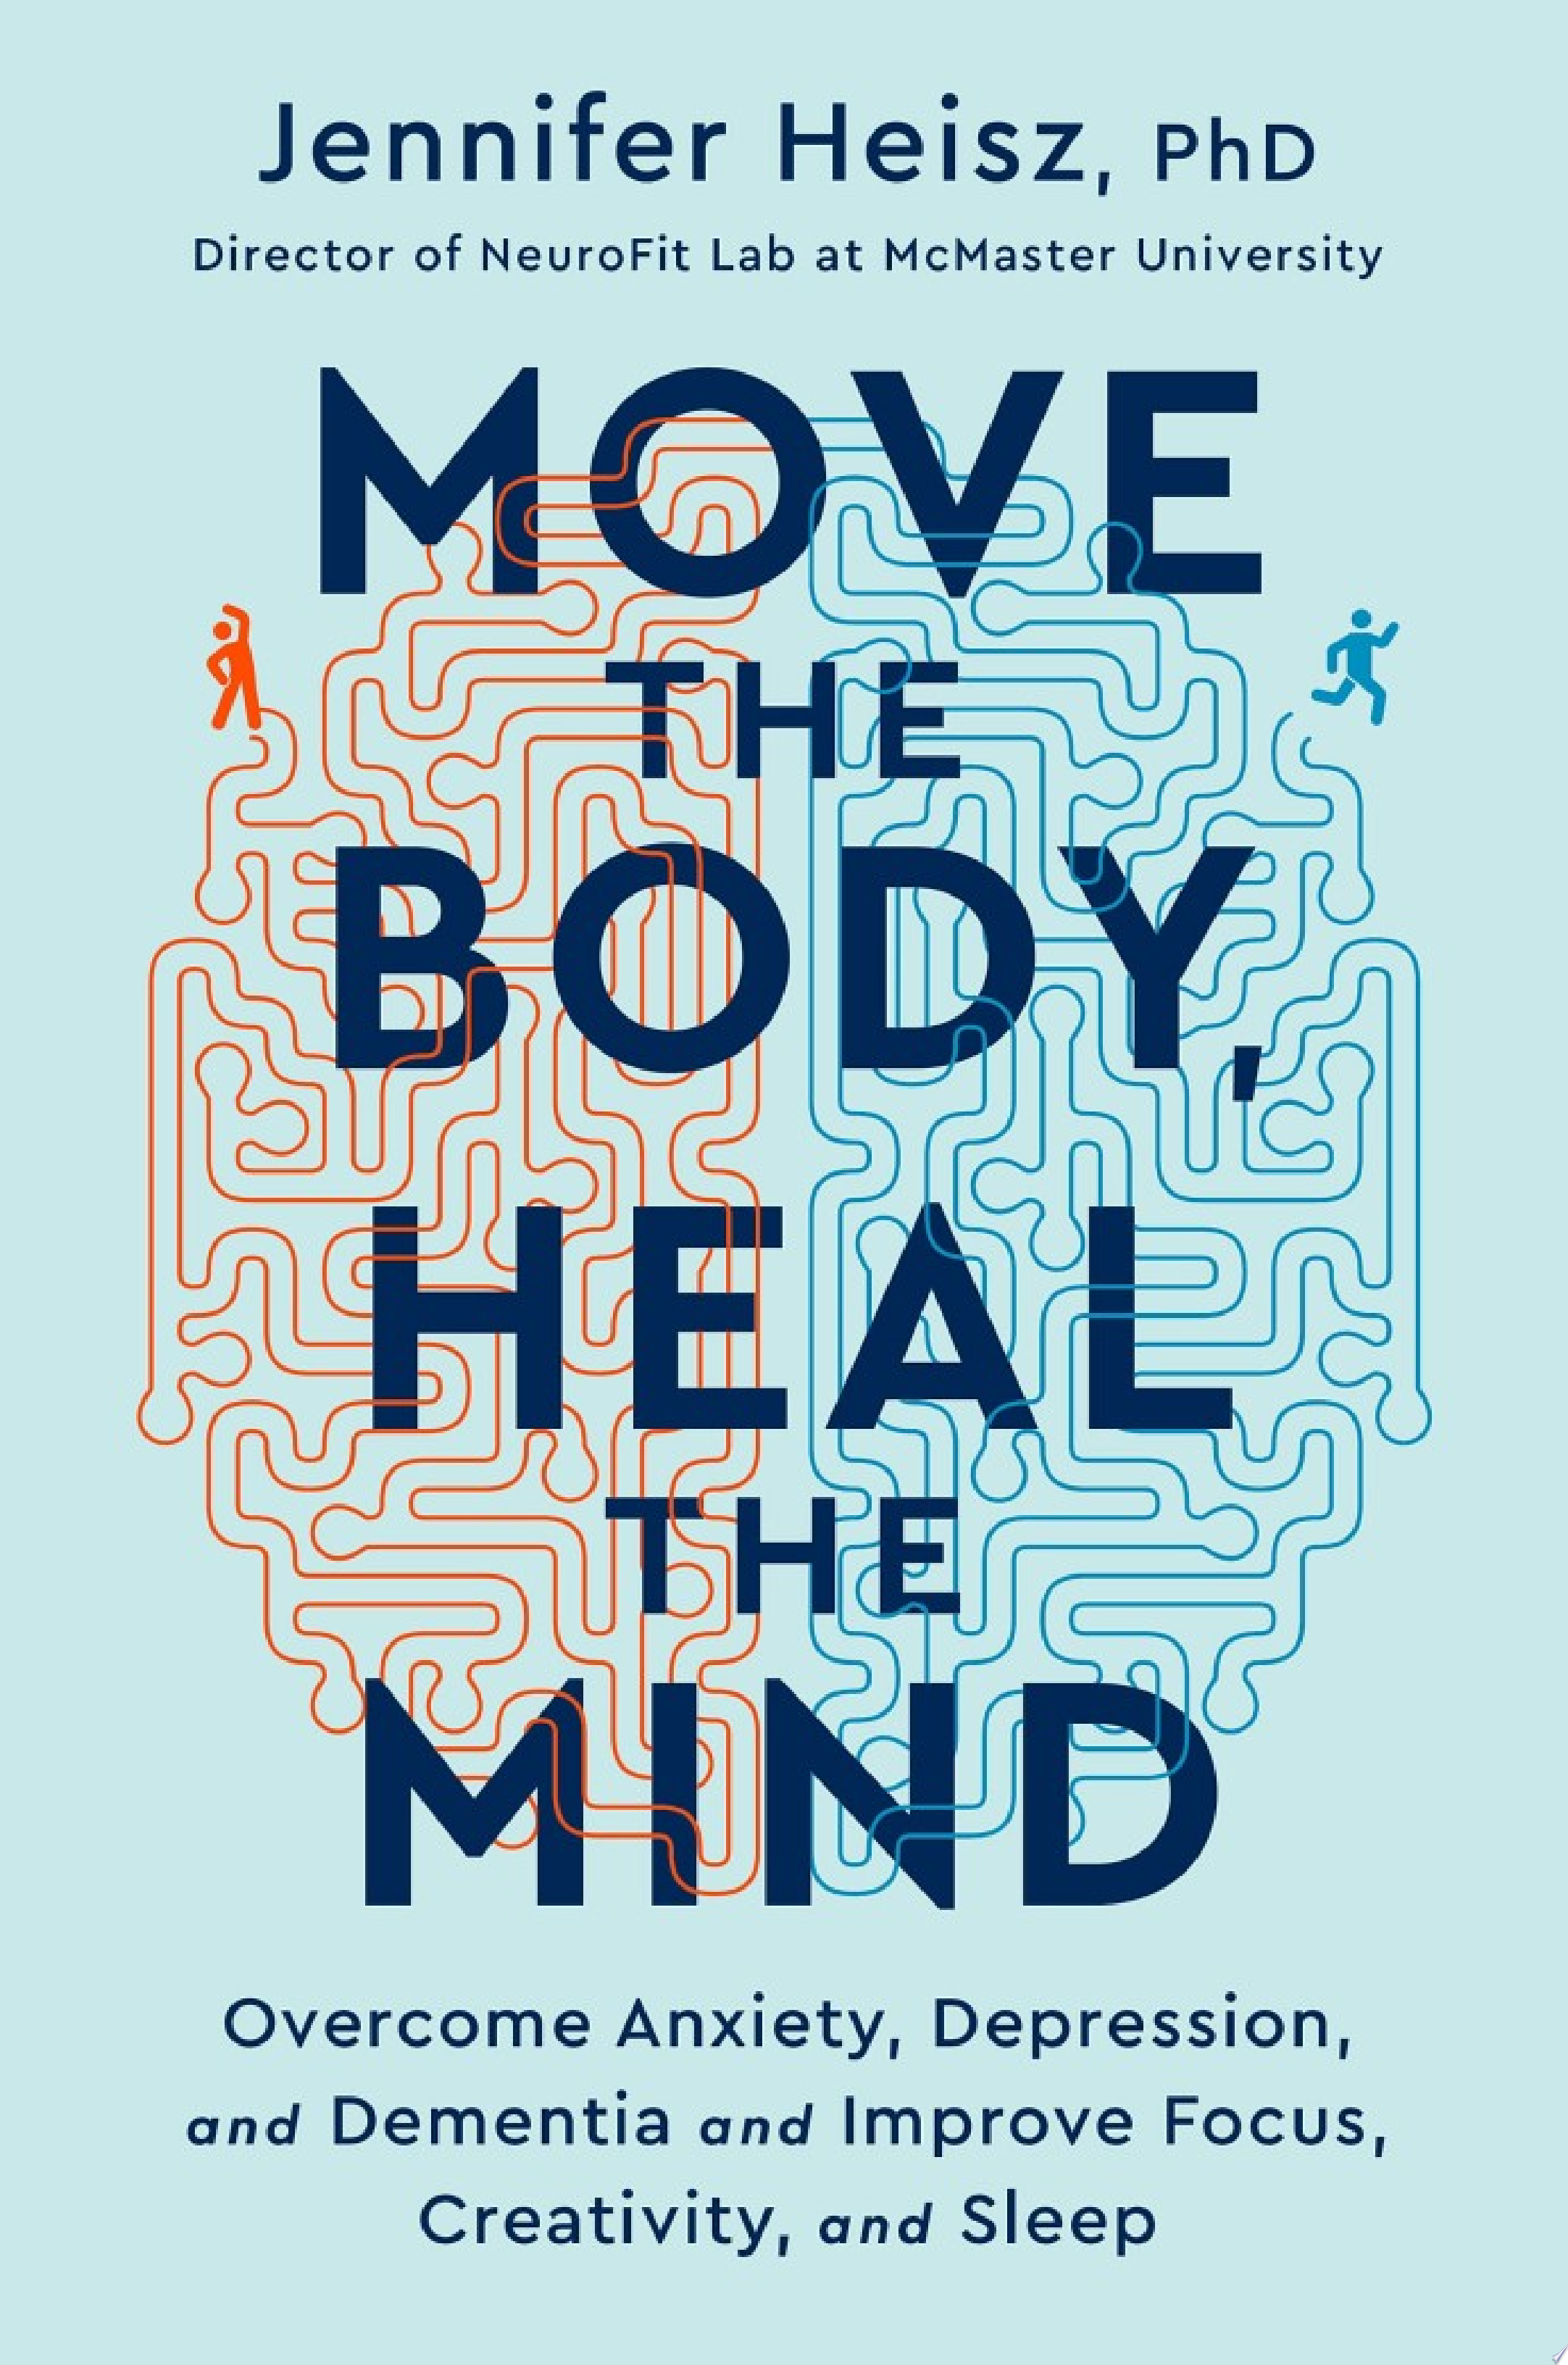 Image for "Move The Body, Heal The Mind"